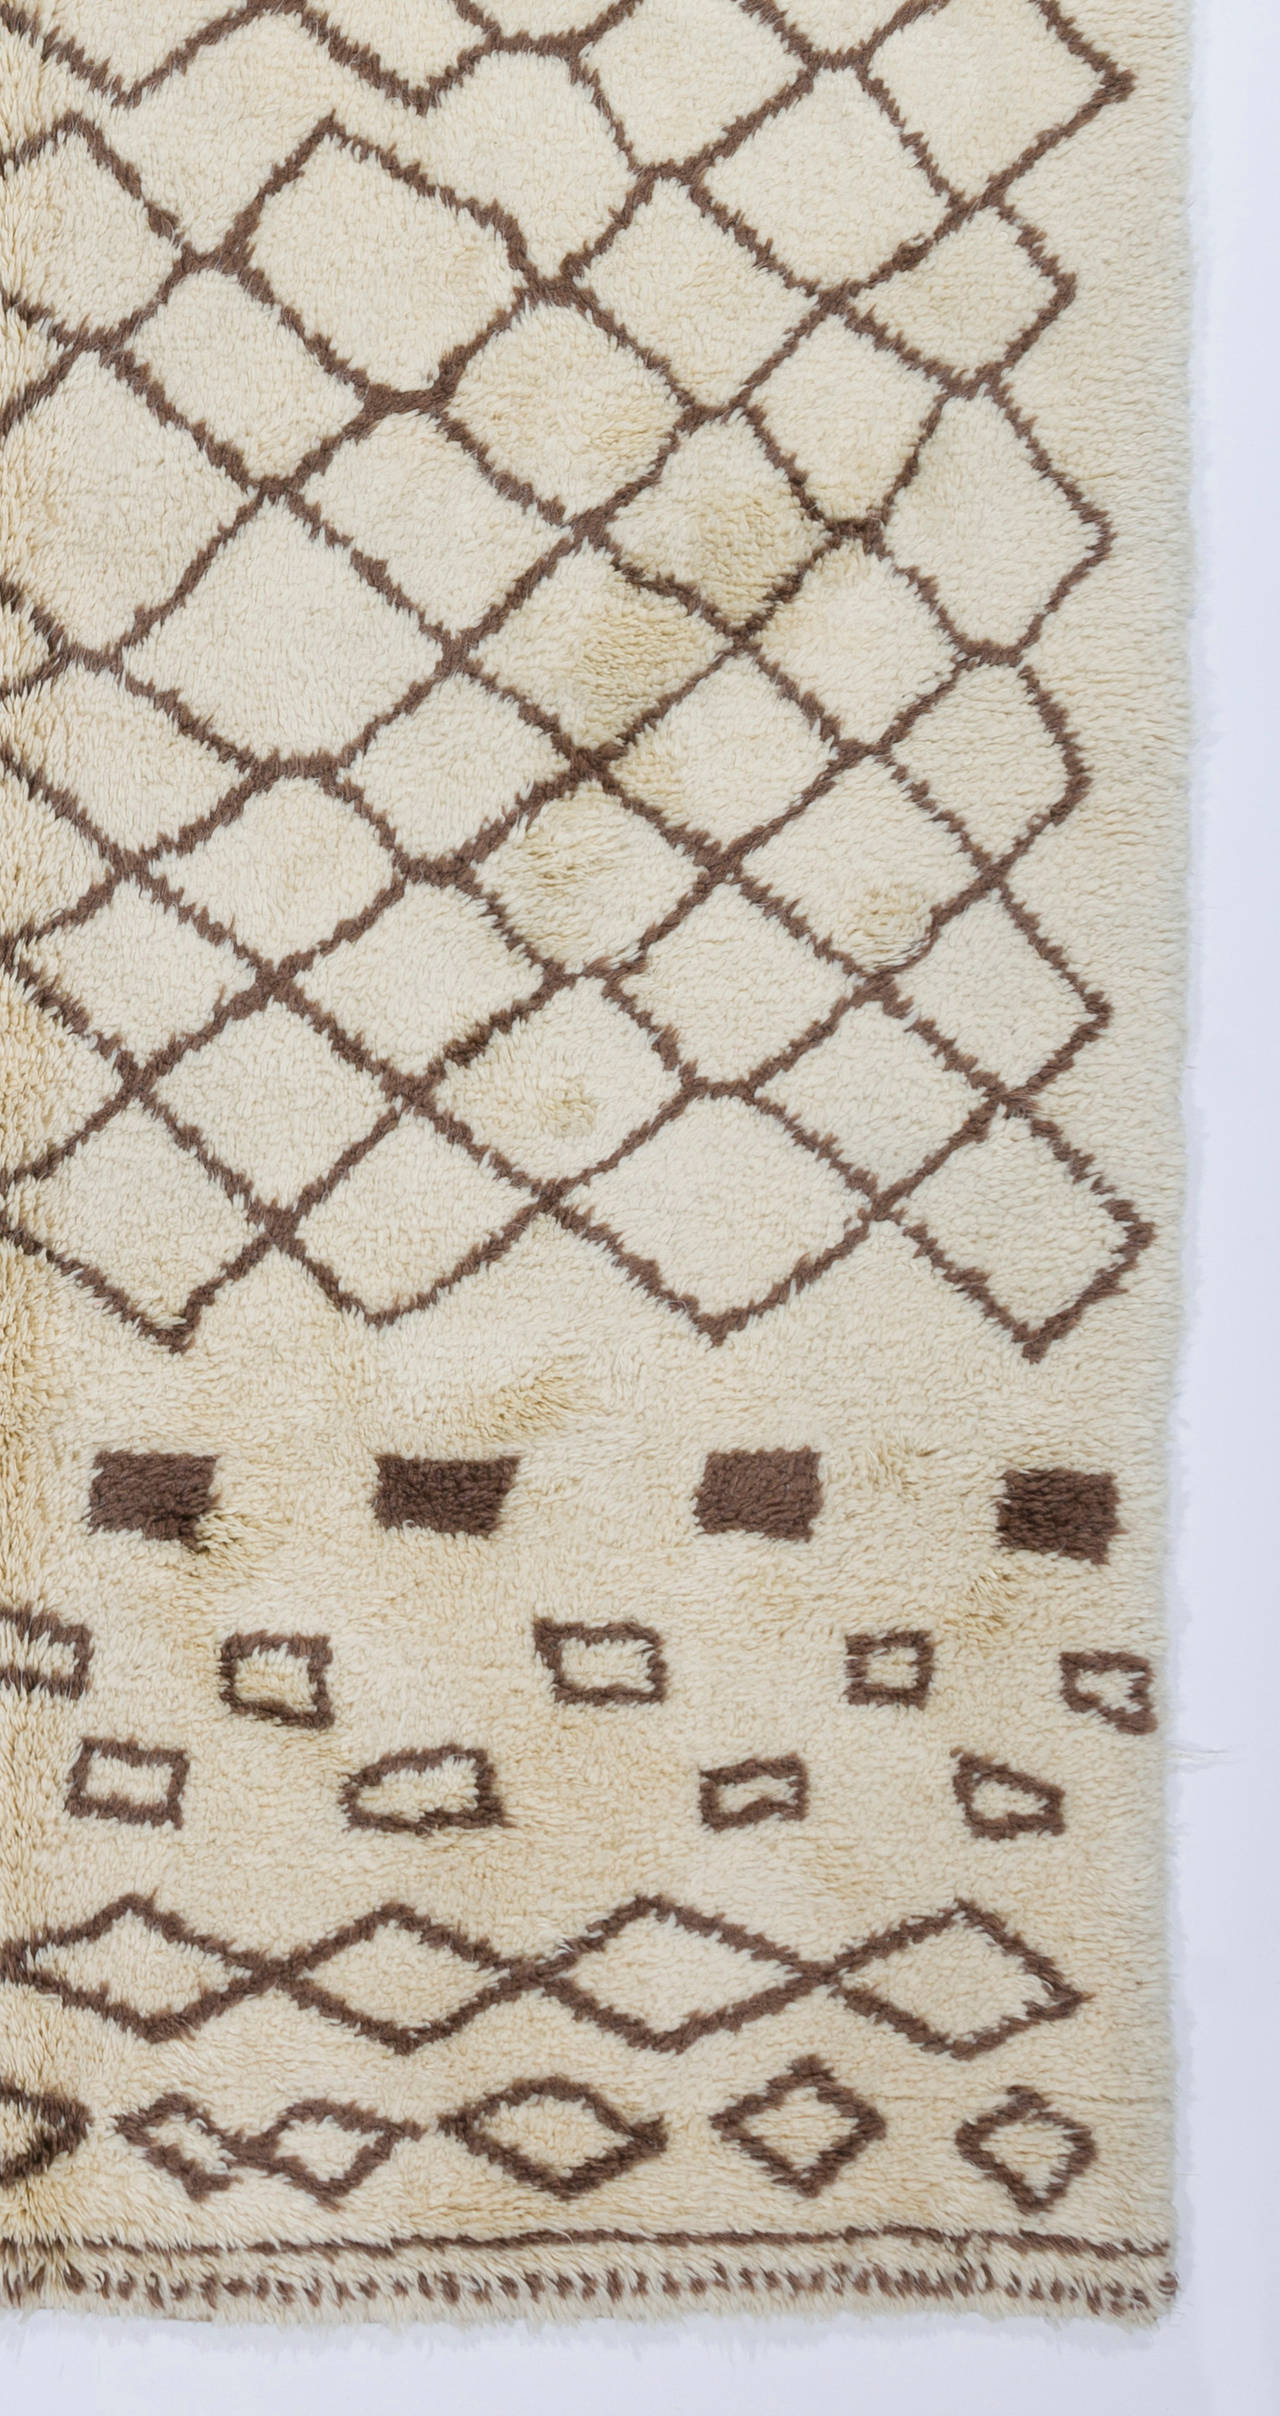 A new handmade rug made of natural hand-spun undyed cream and brown sheep wool. 

The rug can be custom-produced in any size, color, pattern, weave and design in approximately 5 weeks. You choose, we deliver.